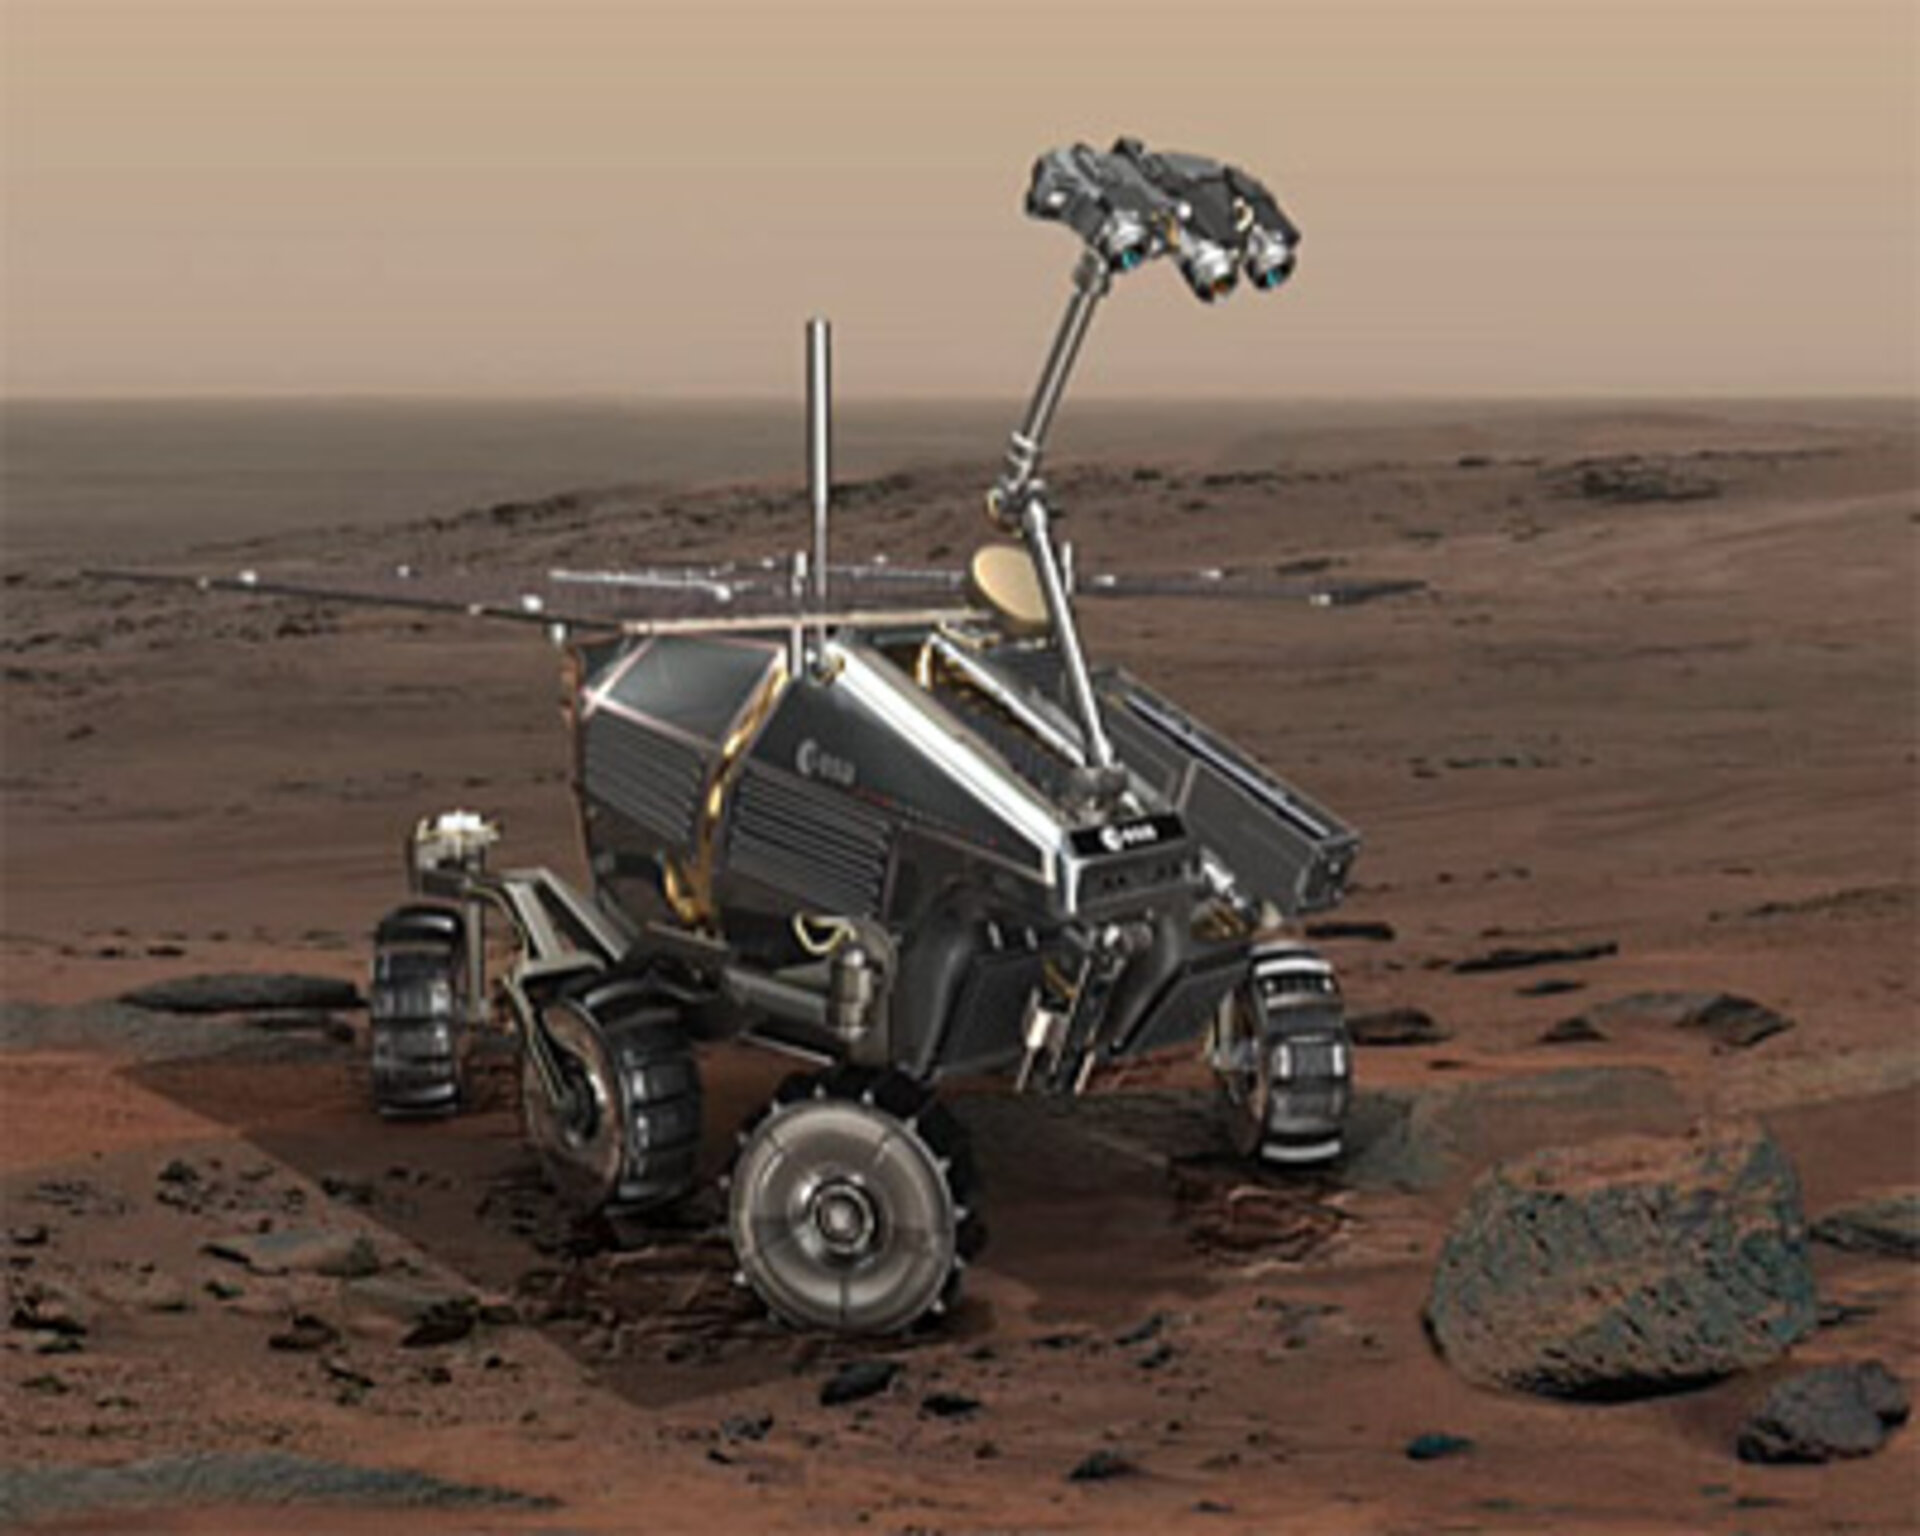 Artist's impression of ExoMars rover arrival at the Red Planet